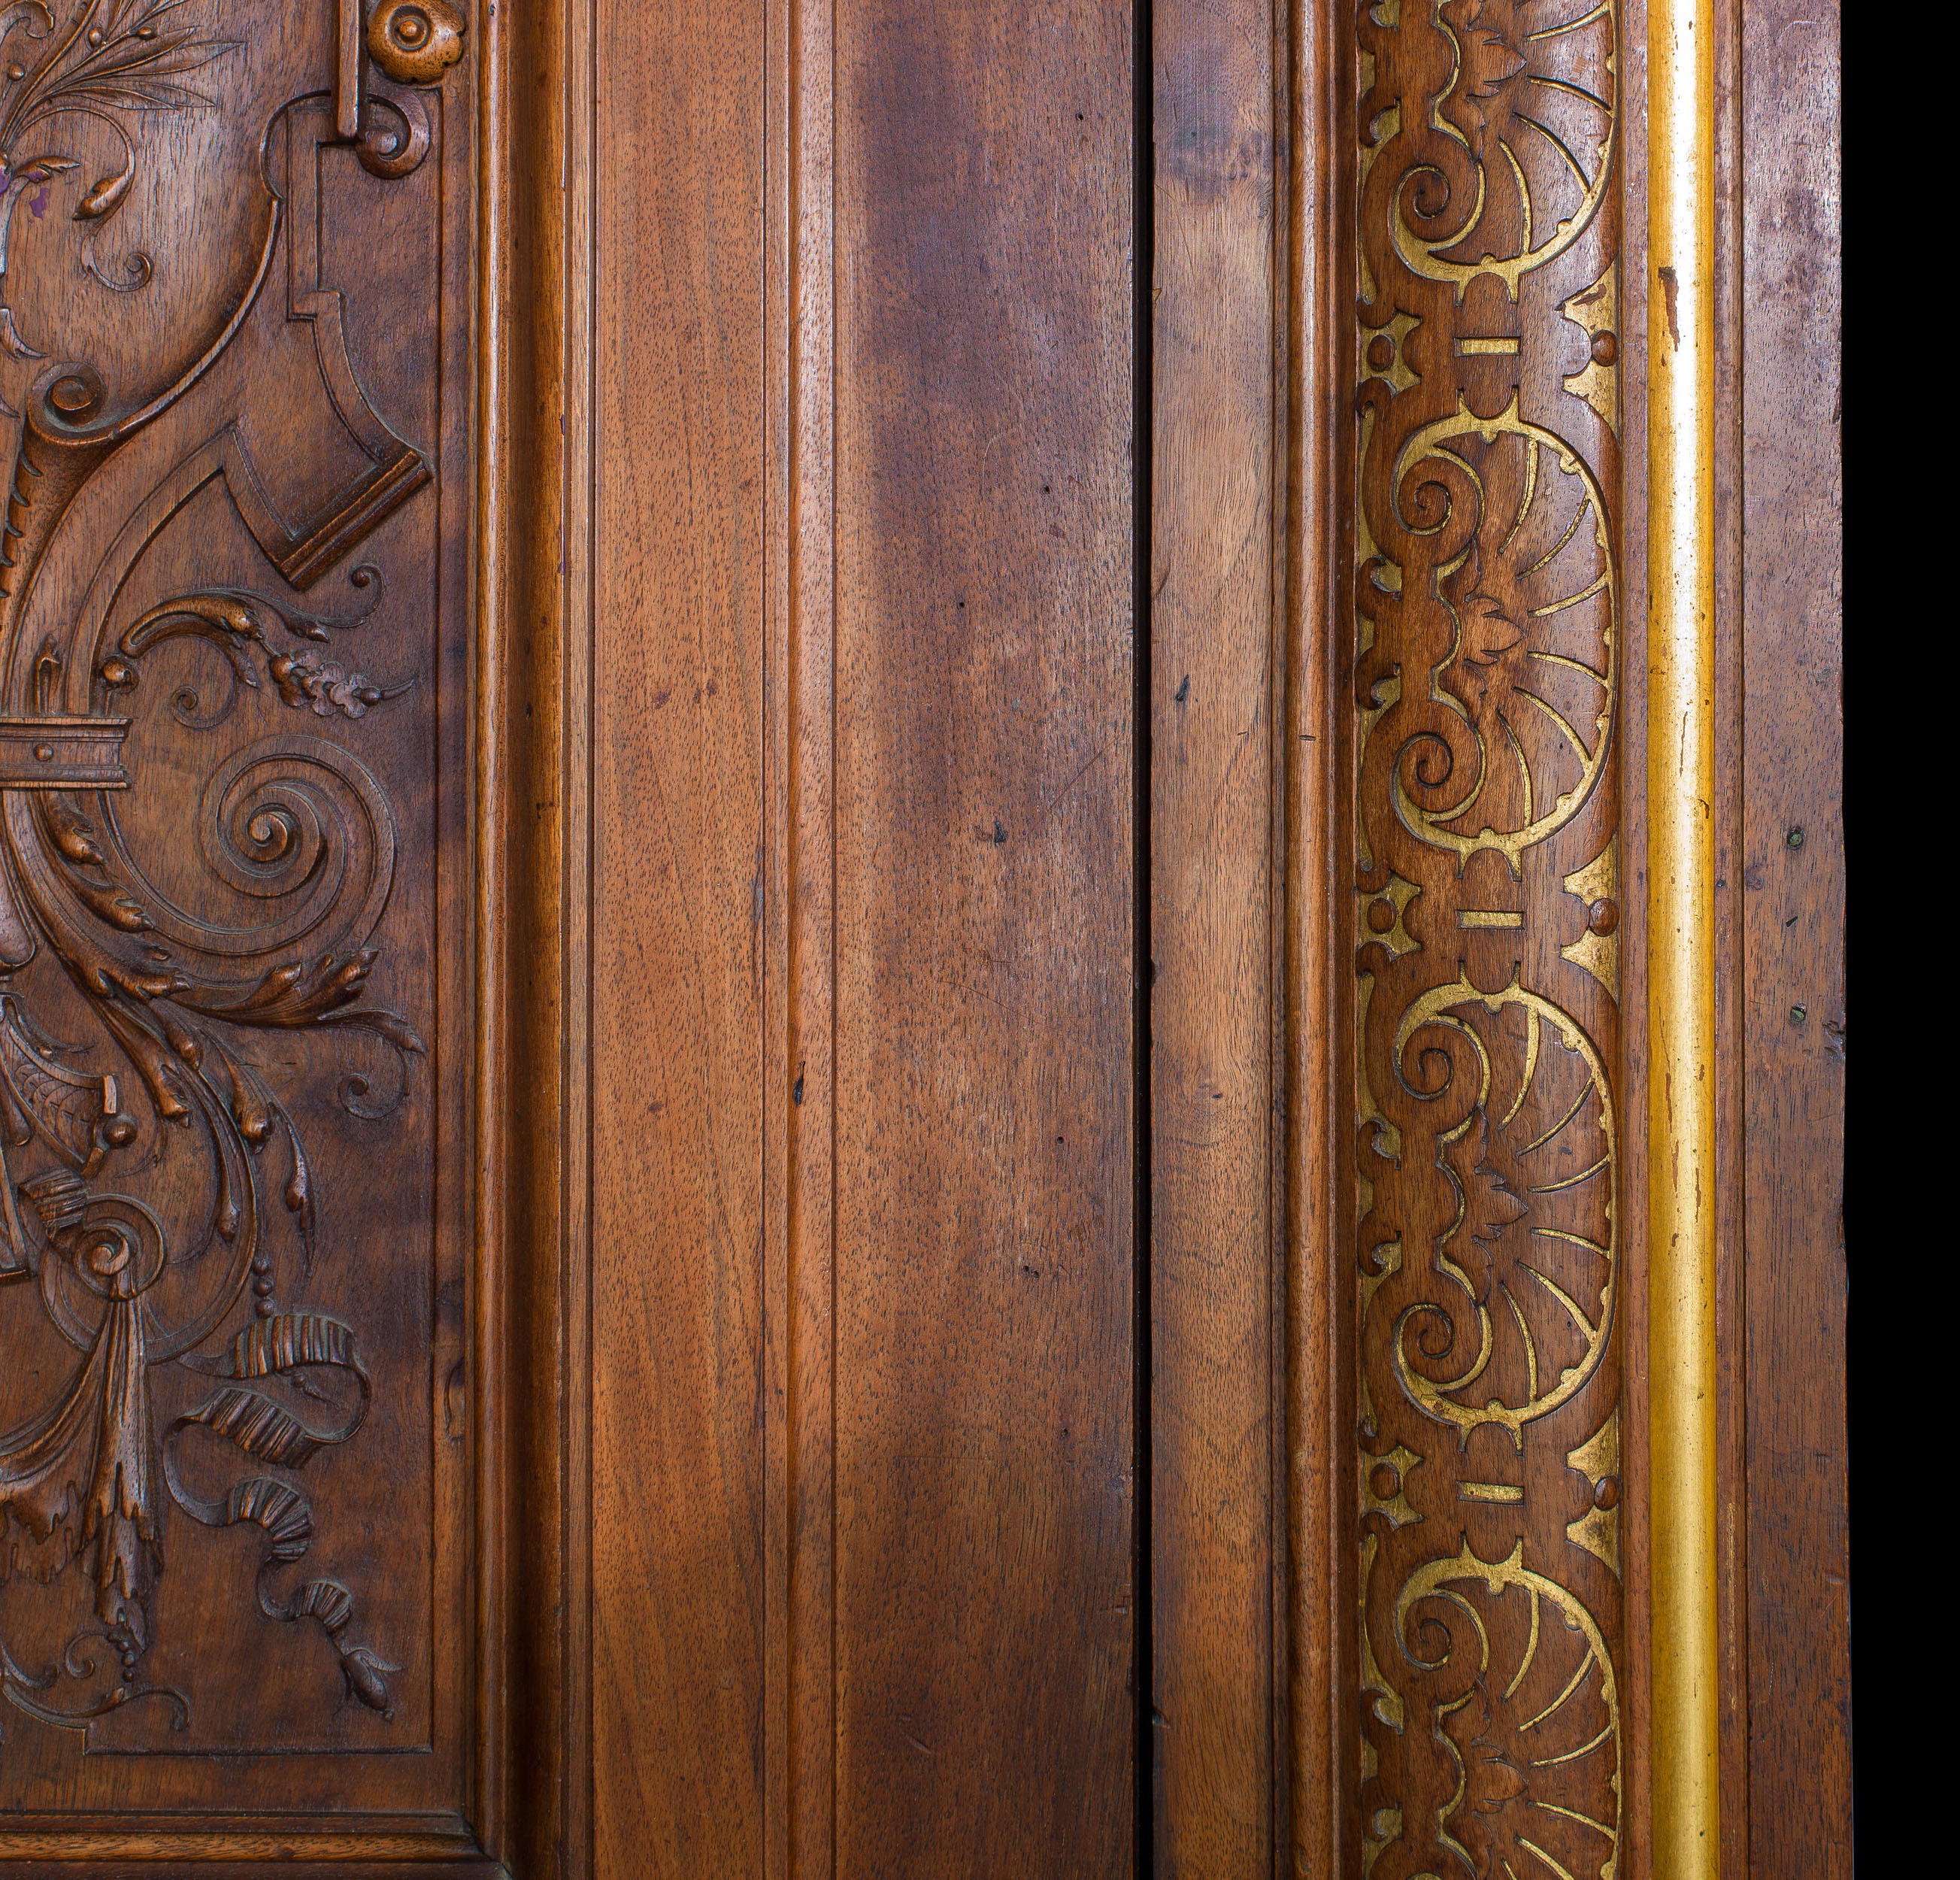 A grand pair of French walnut doors